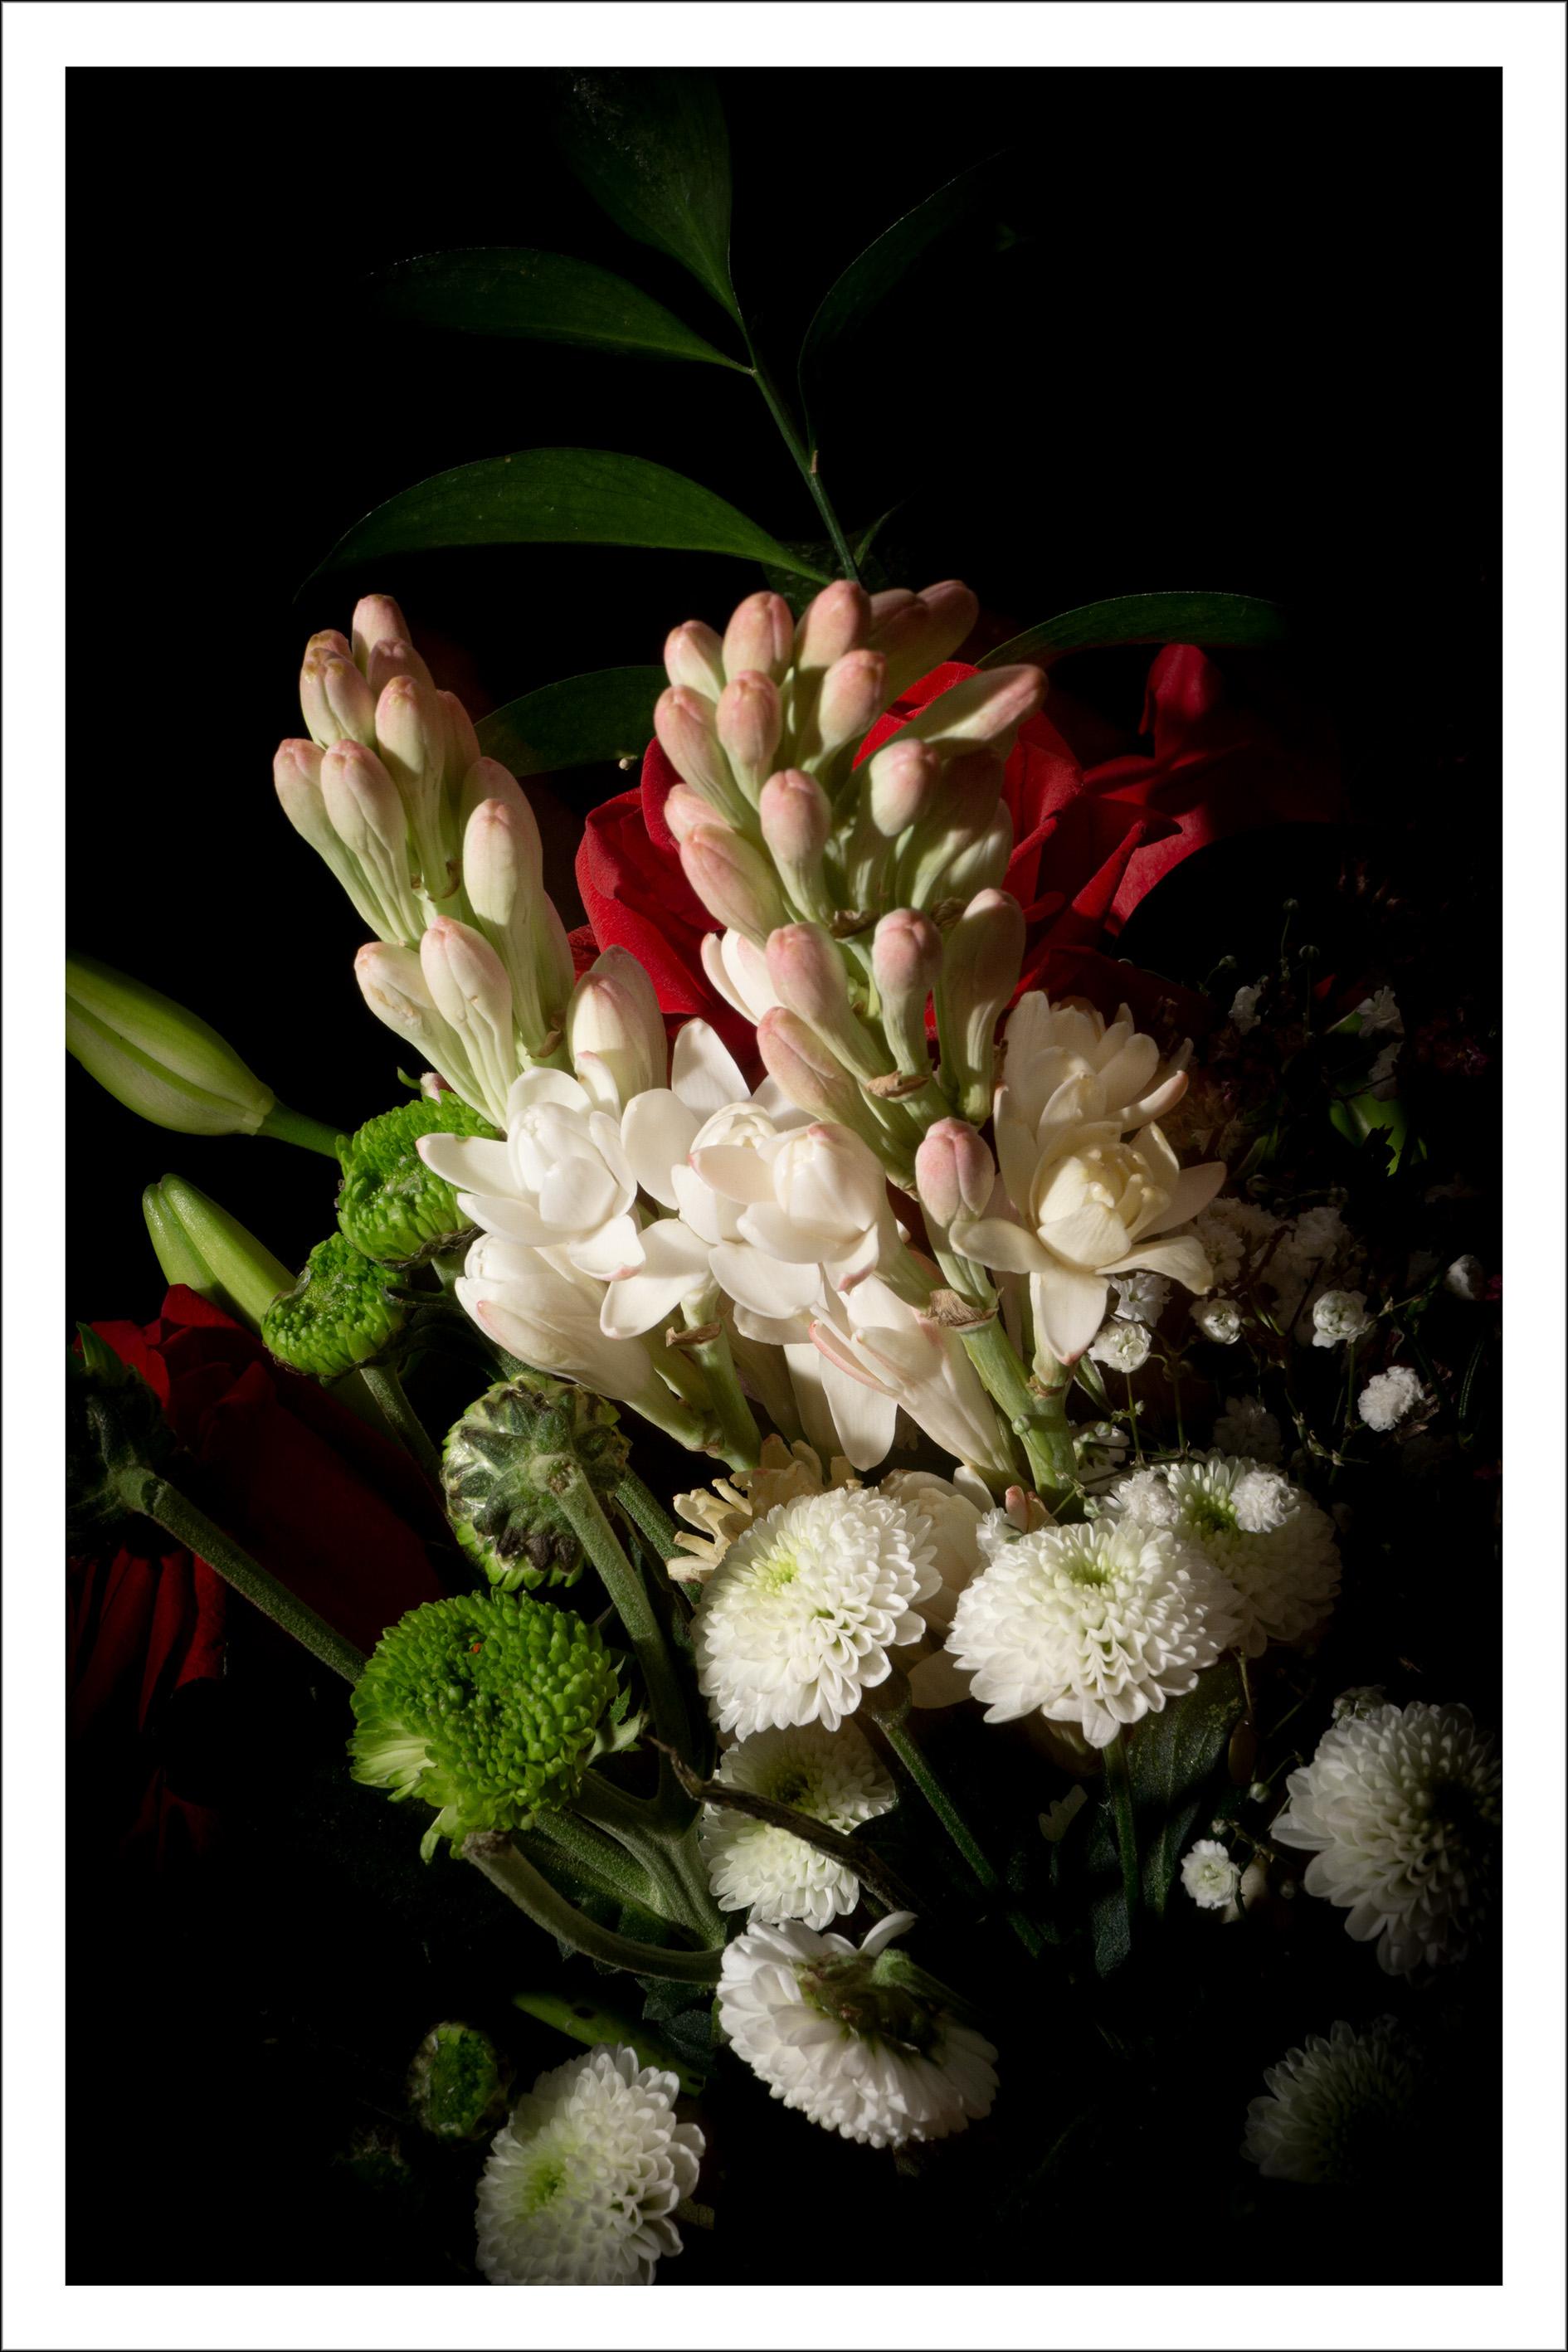 Kind of Cyan Landscape Photograph - Flowers with Caravaggio Light, Baroque Still-Life Bouquet, Limited, Close Up